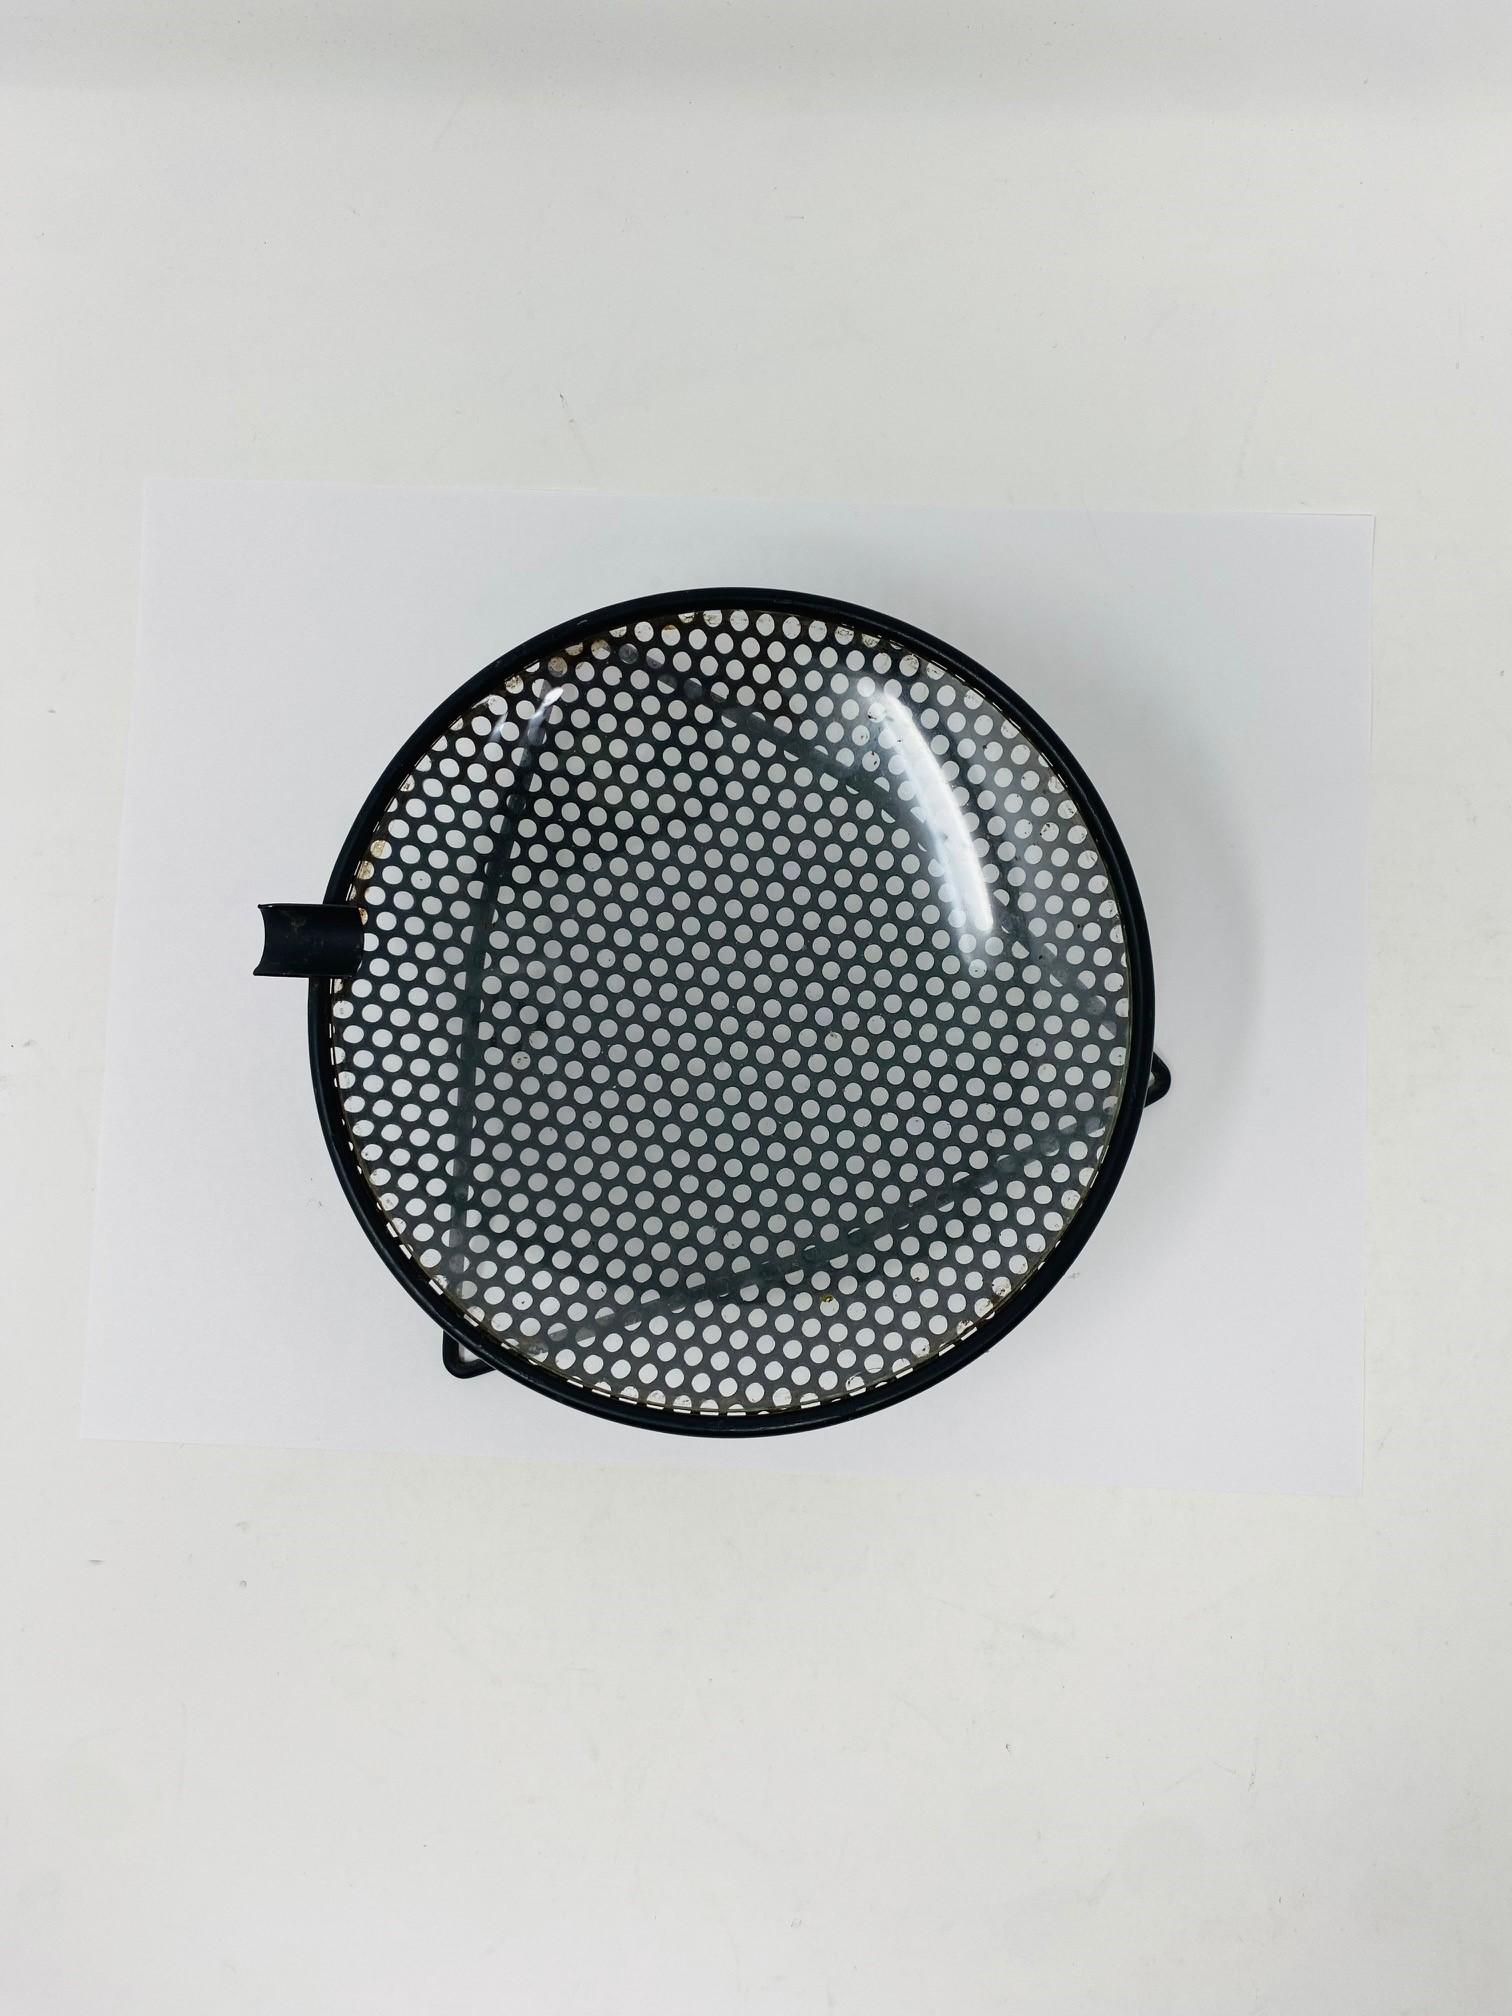 Mid-20th Century 1950s Perforated Metal Mesh Atomic Dish Ashtray Nº S30  Richard Galef Ravenware For Sale